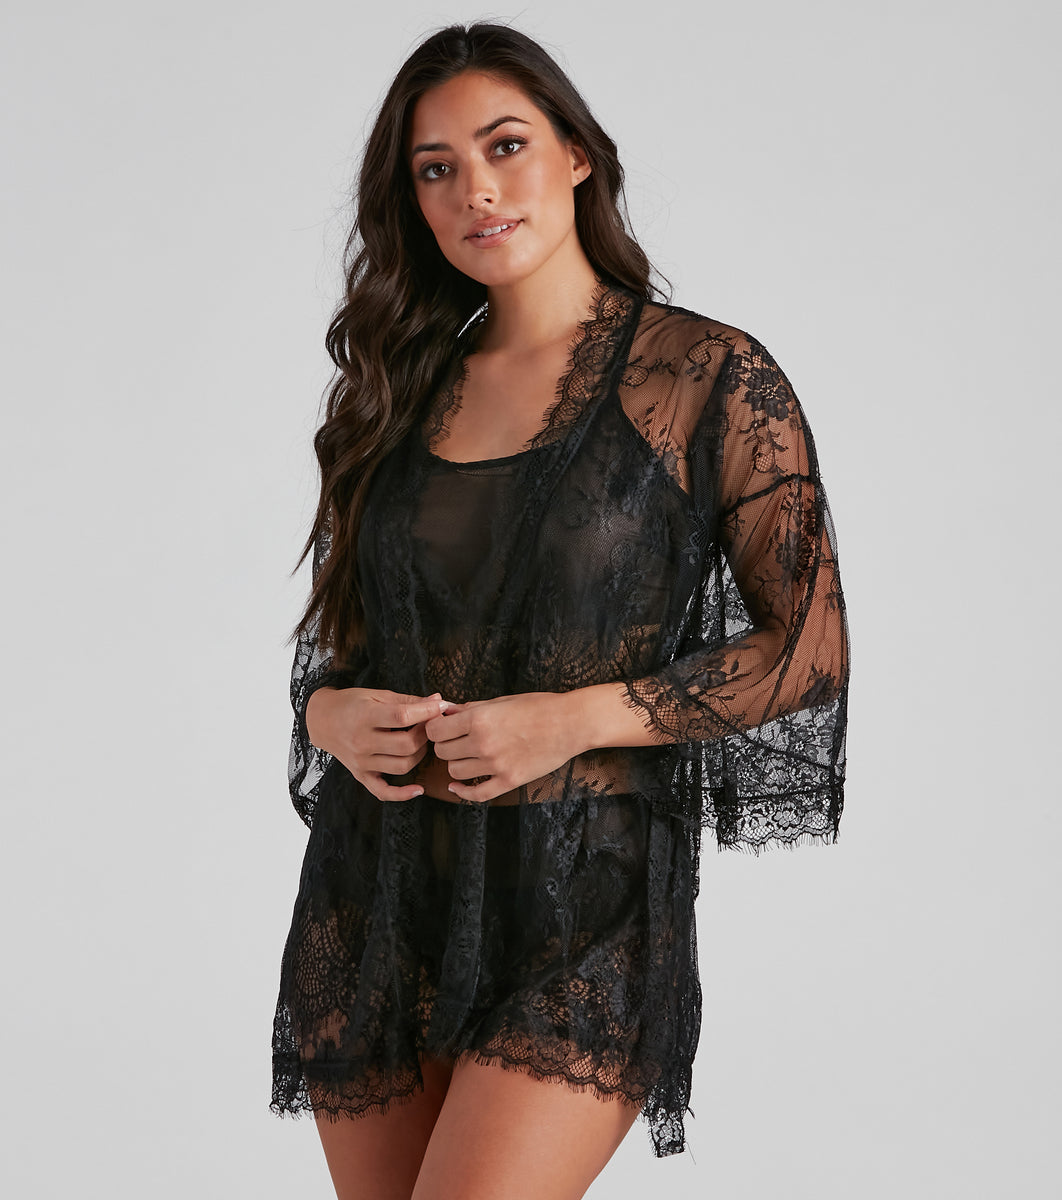 Lace And Love Short Robe Panty Set